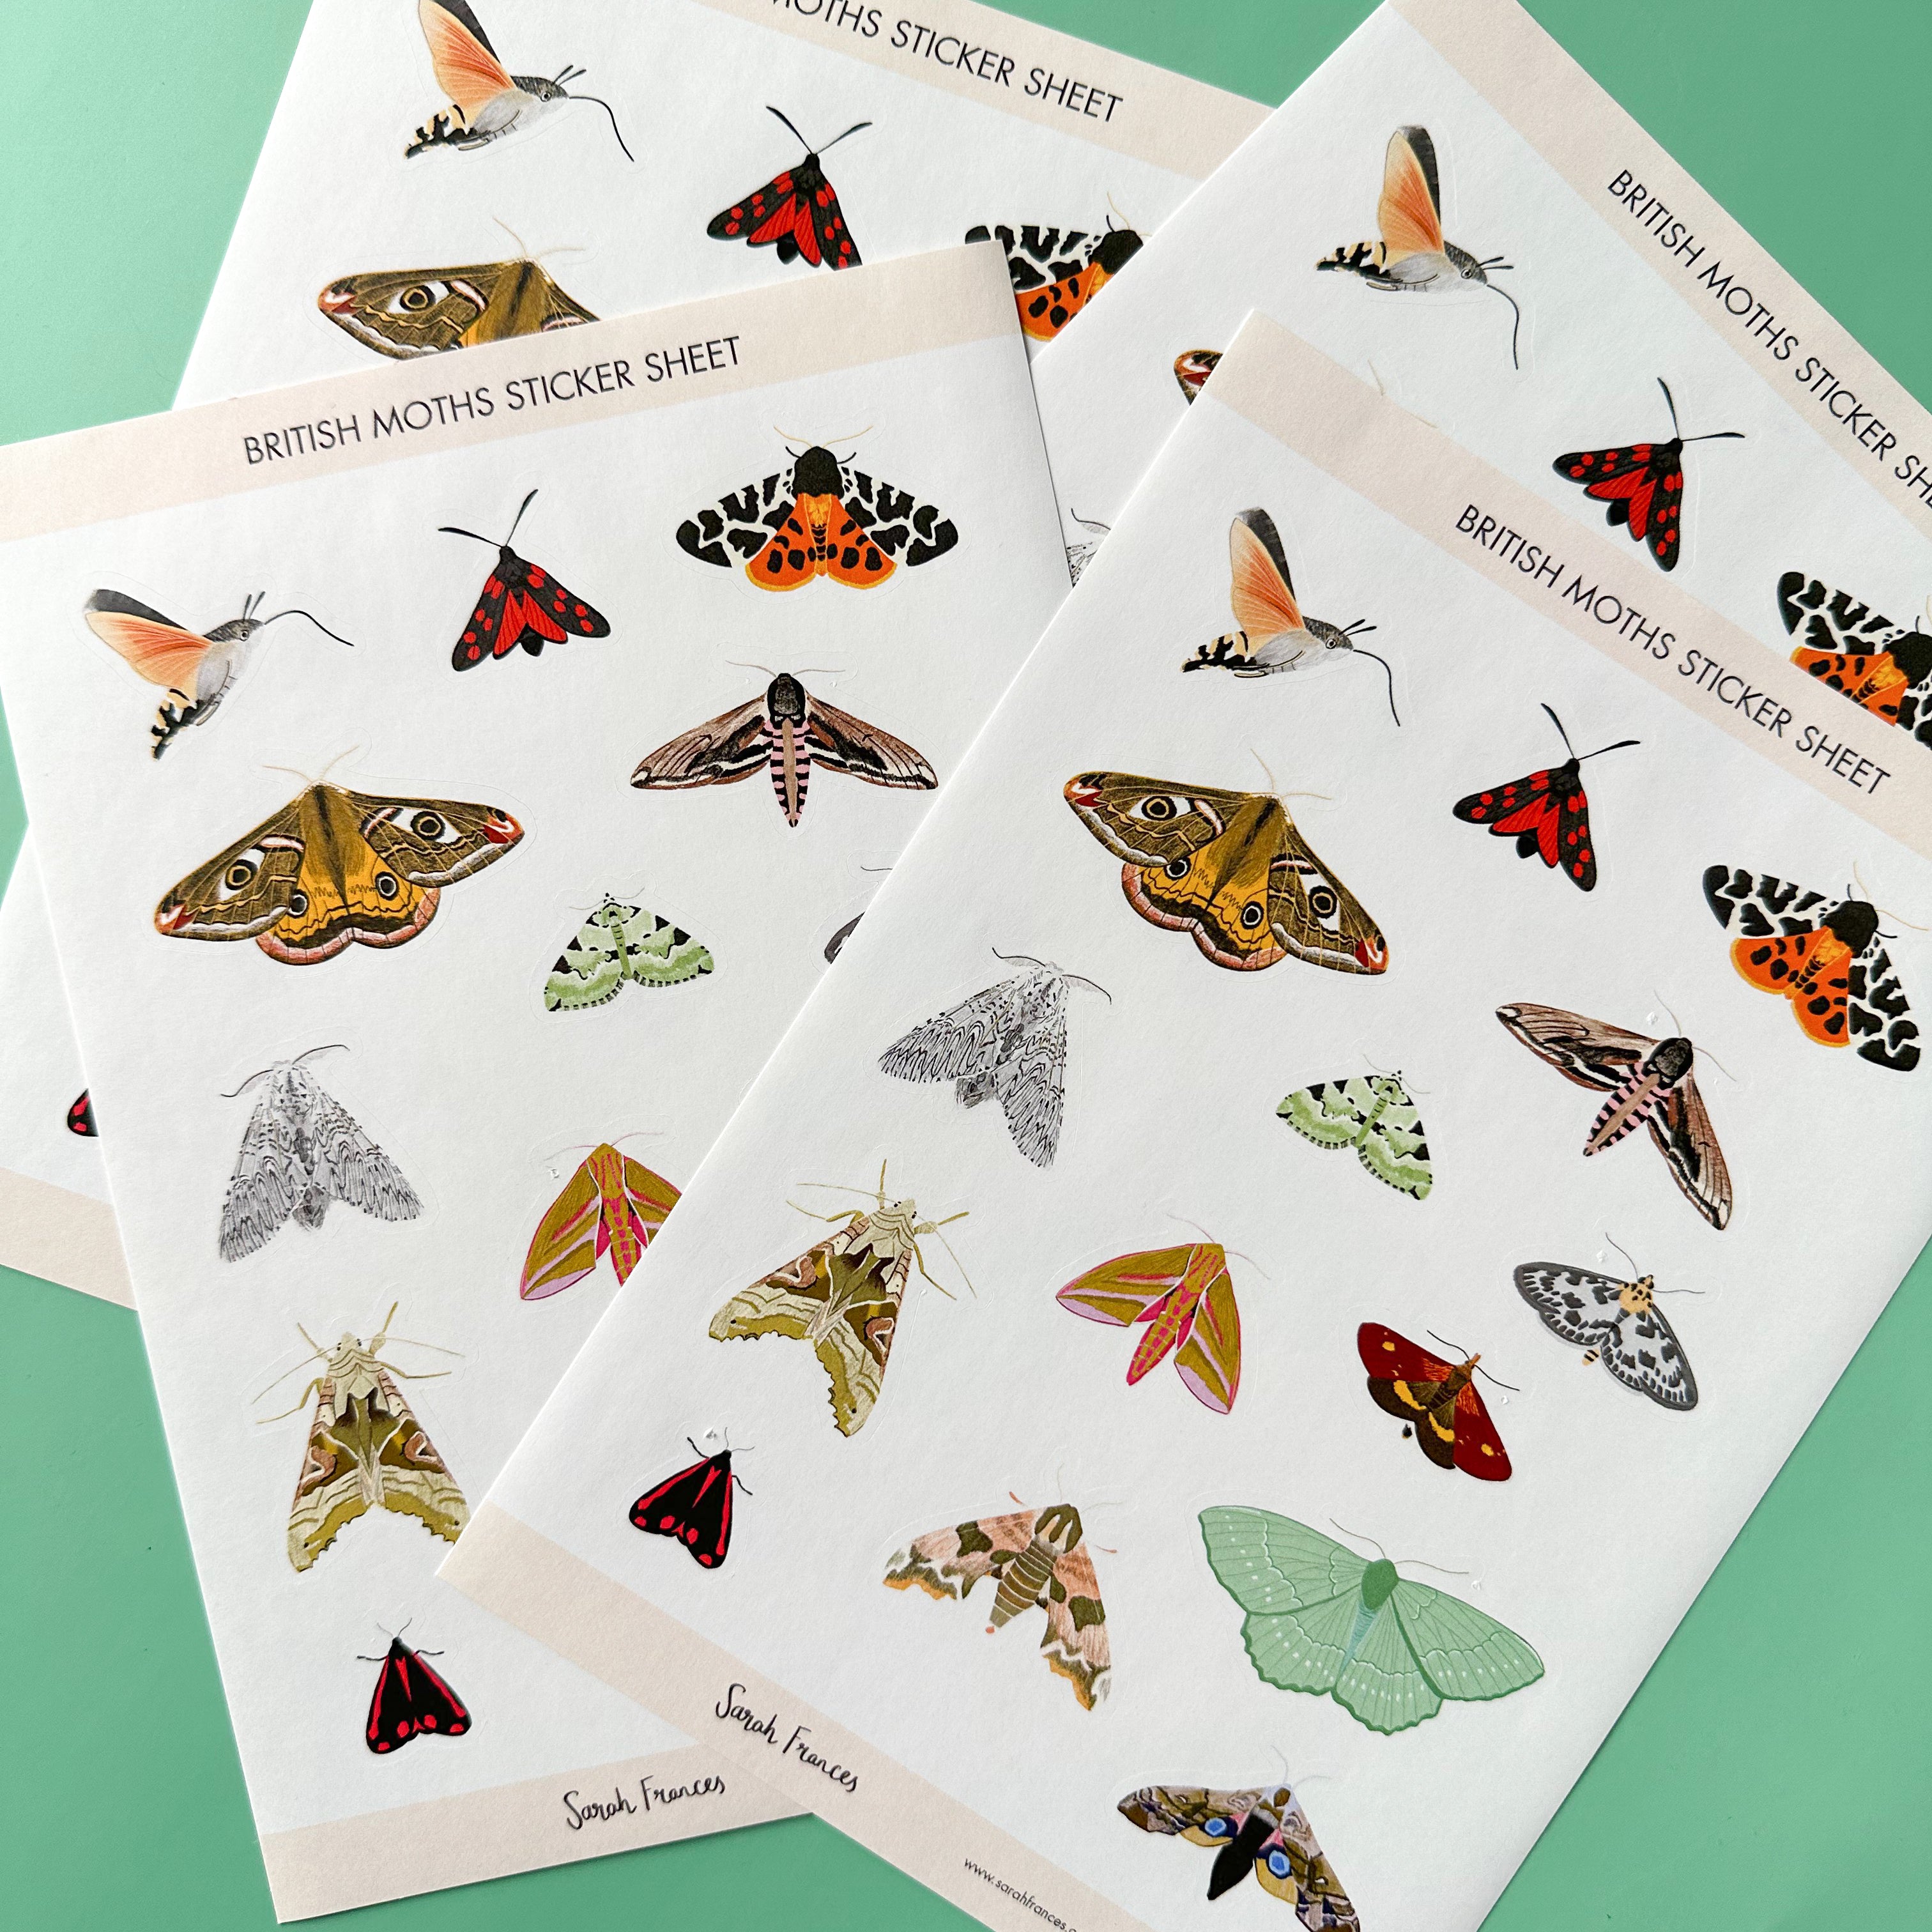 Illuminate your crafts with our British Moth Sticker Sheet, adorned with charming illustrations of native British moth species. Ideal for adding a touch of nocturnal wonder and beauty to your crafts. These stickers are designed by Sarah Frances and sold at BBB Supplies Craft Shop.